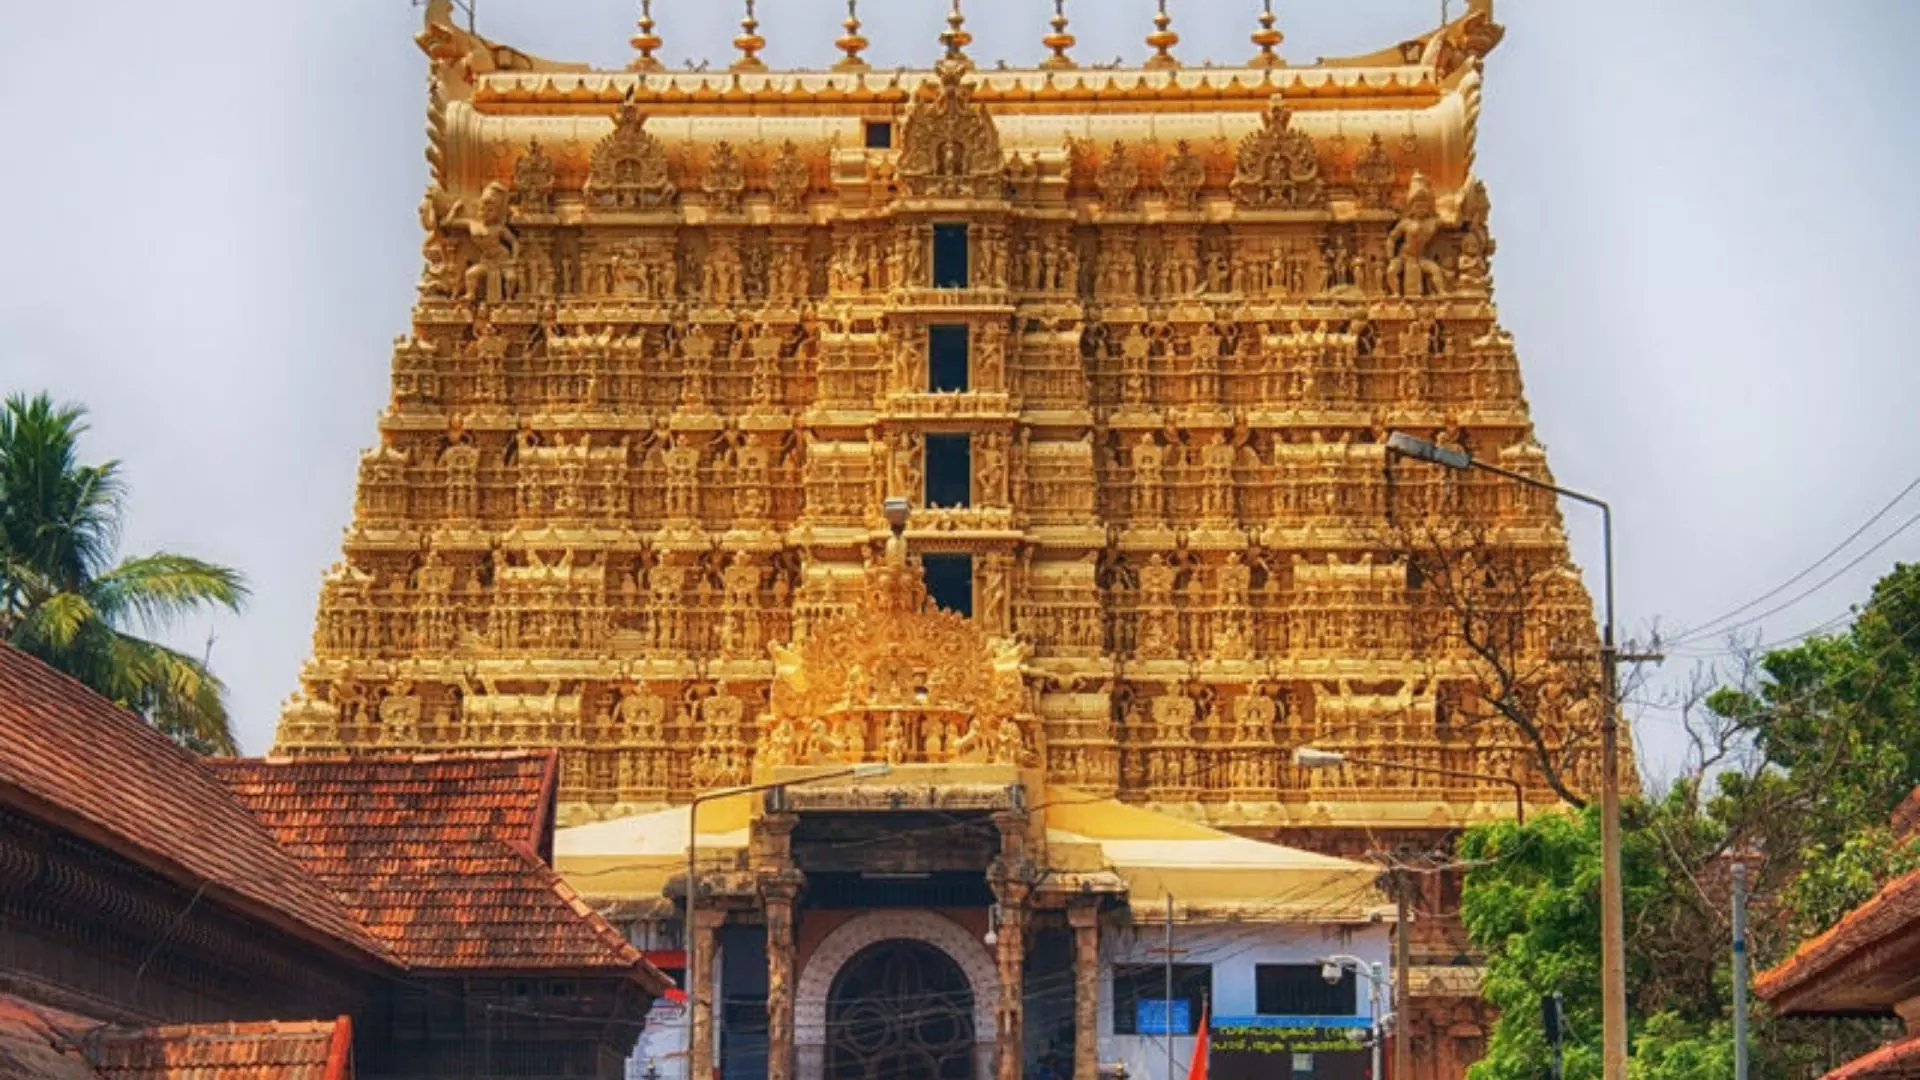 Supreme Court Ordered to Conduct Audit on Padmanabha Swamy Temple Transactions Made in 25 Years